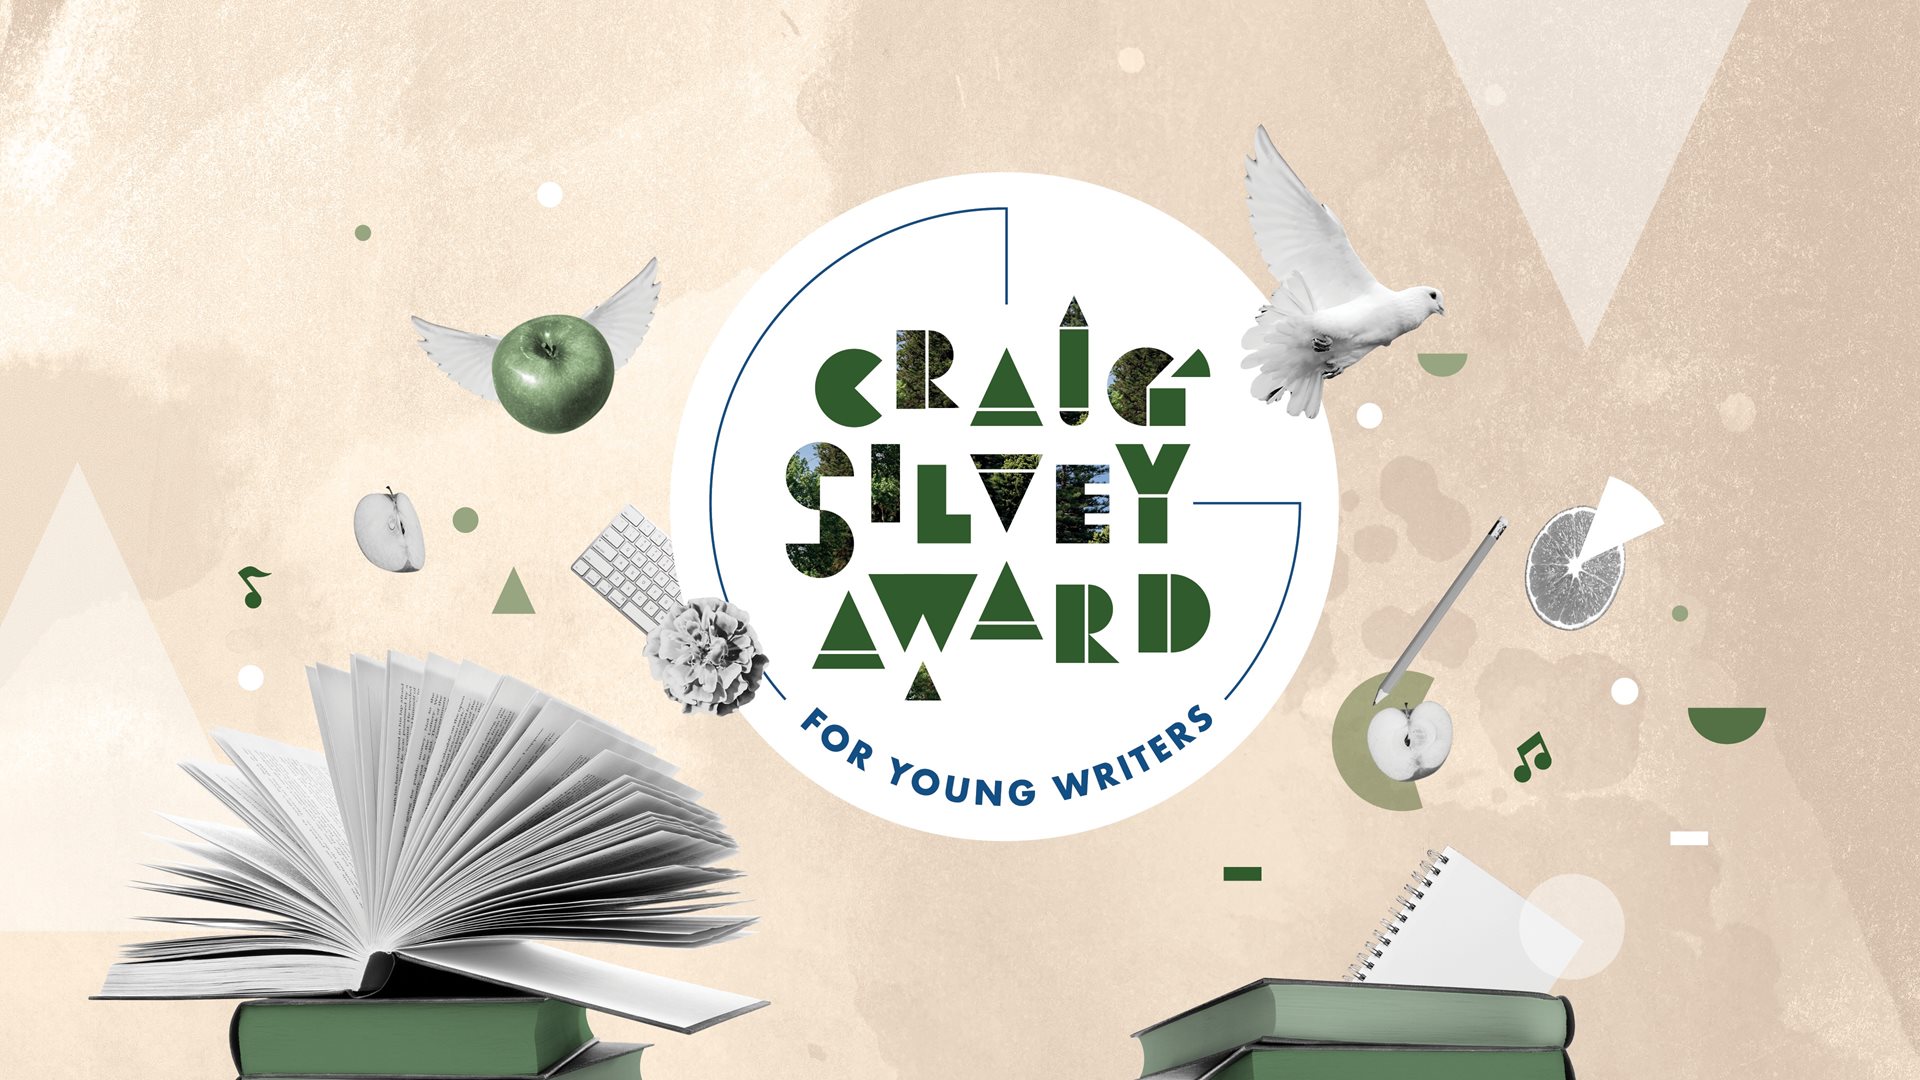 Craig Silvey Award for Young Writers